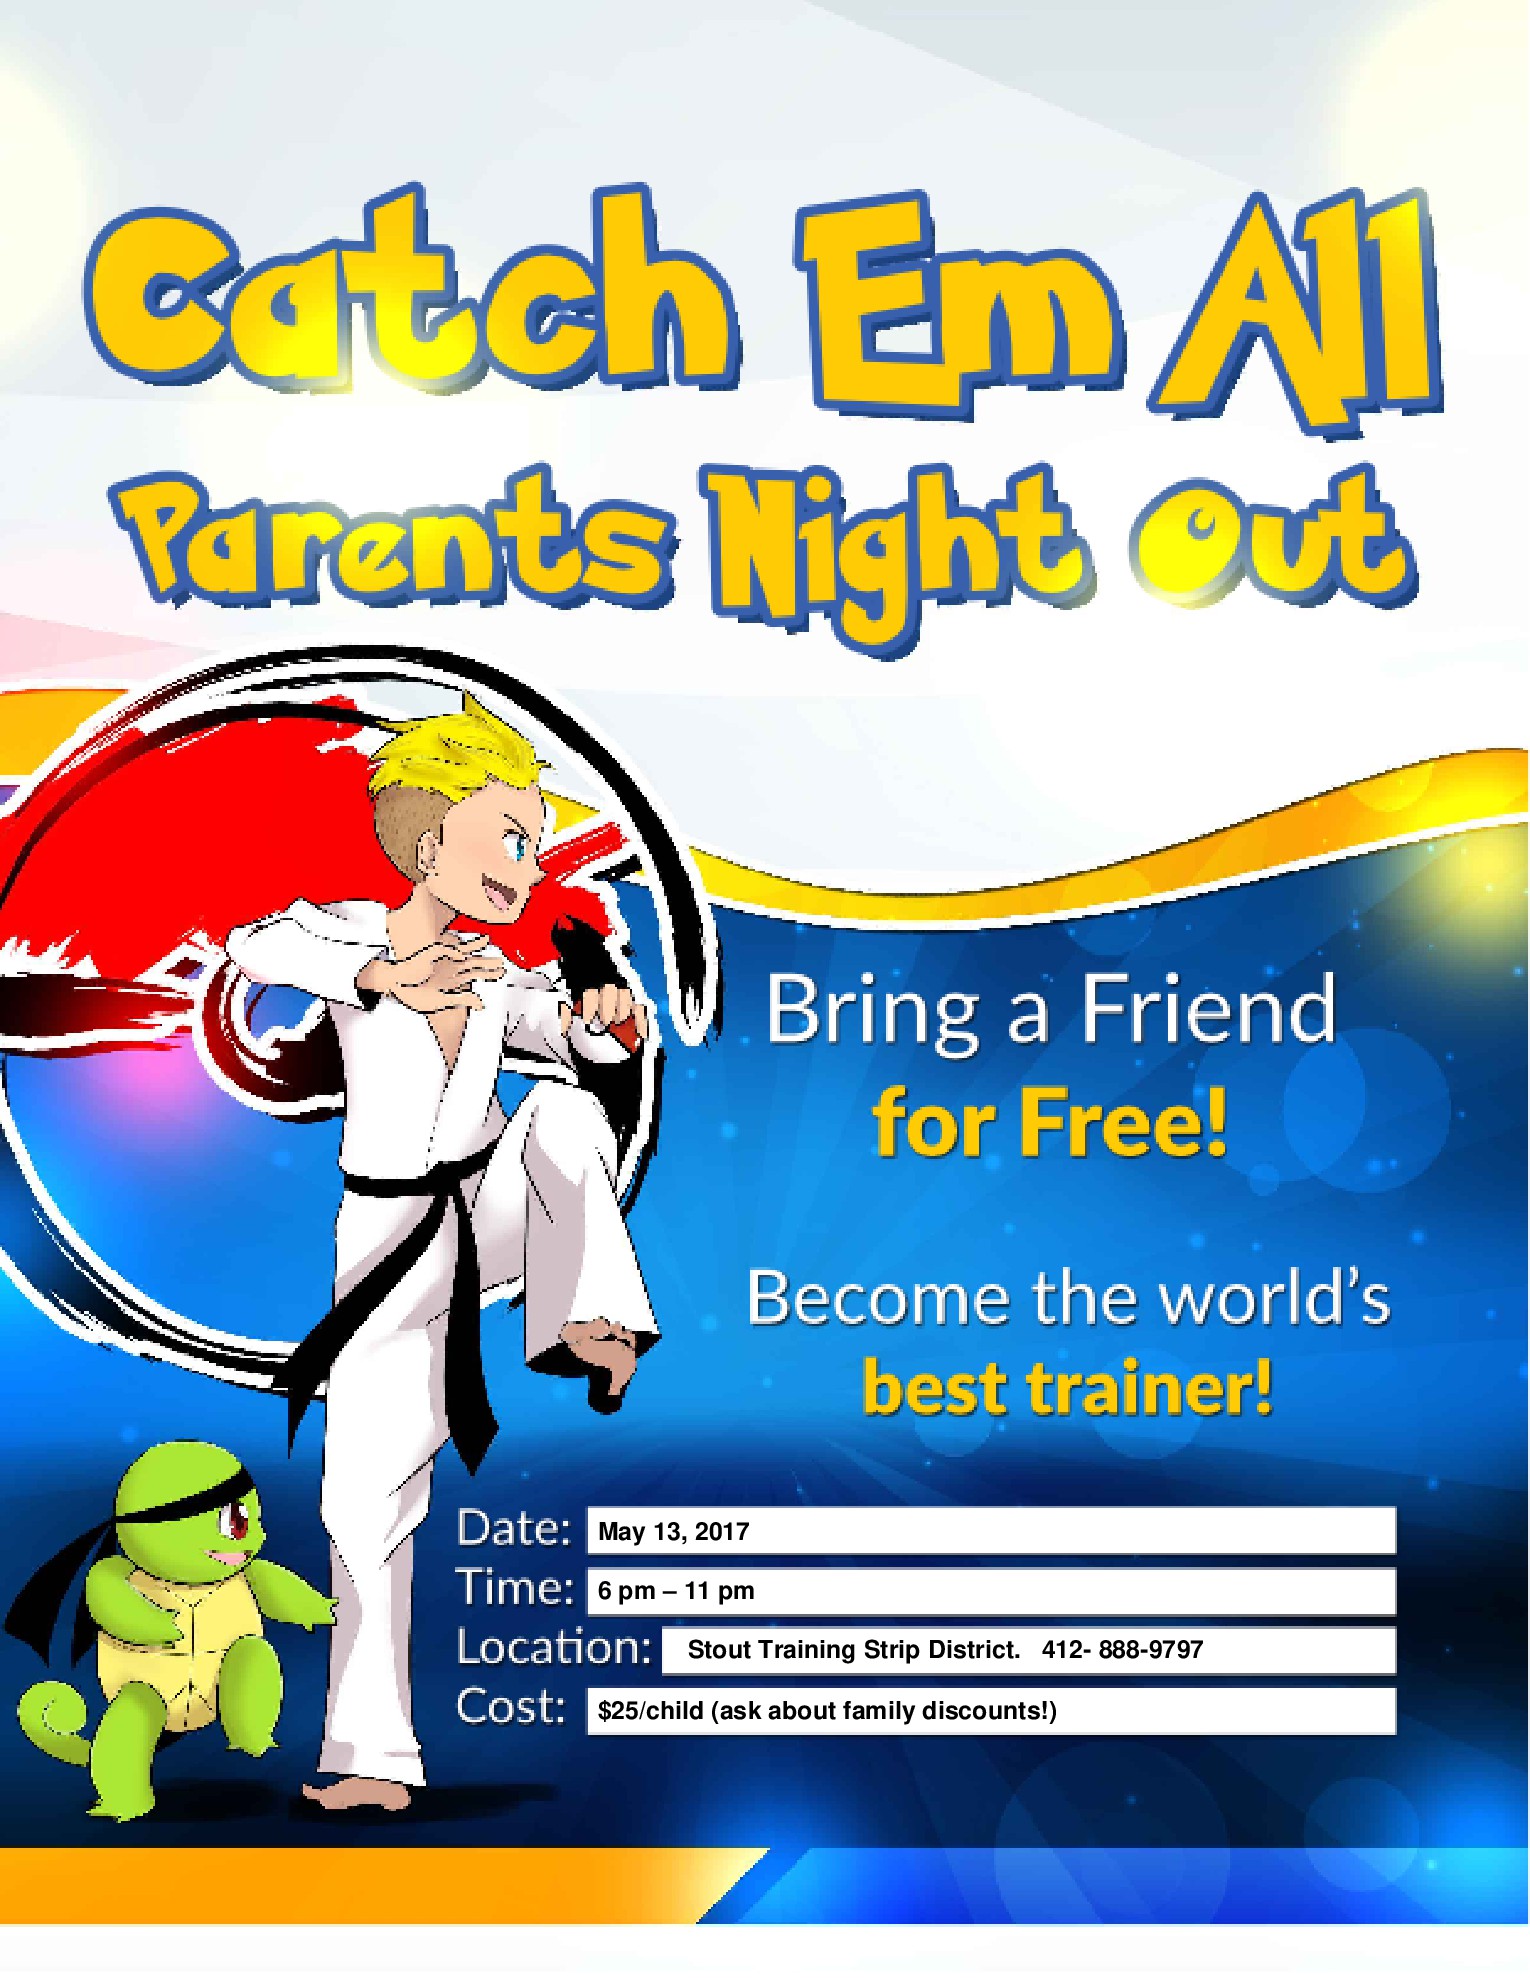 Kids evening event “Catch Em All” May 13th